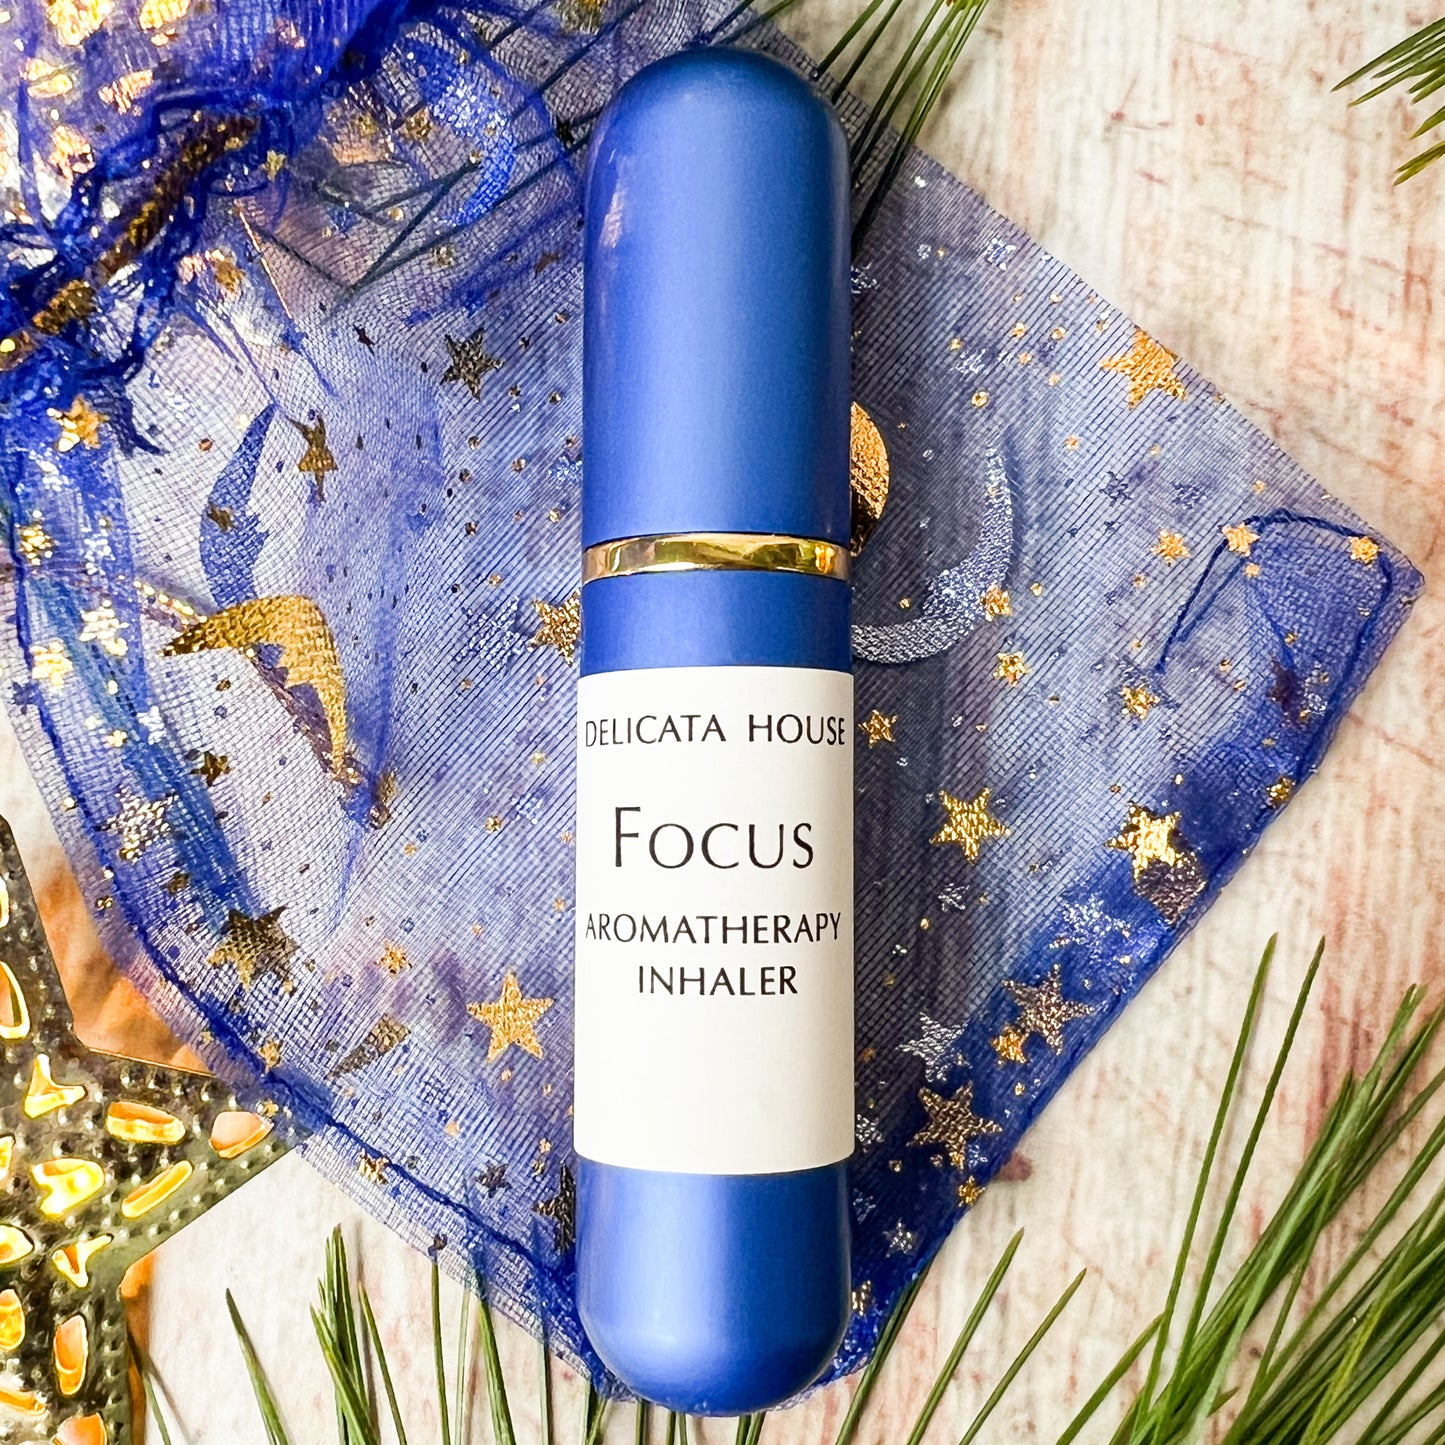 Focus Aromatherapy Nasal Inhaler - Aromatherapy for Focus and Mental Clarity